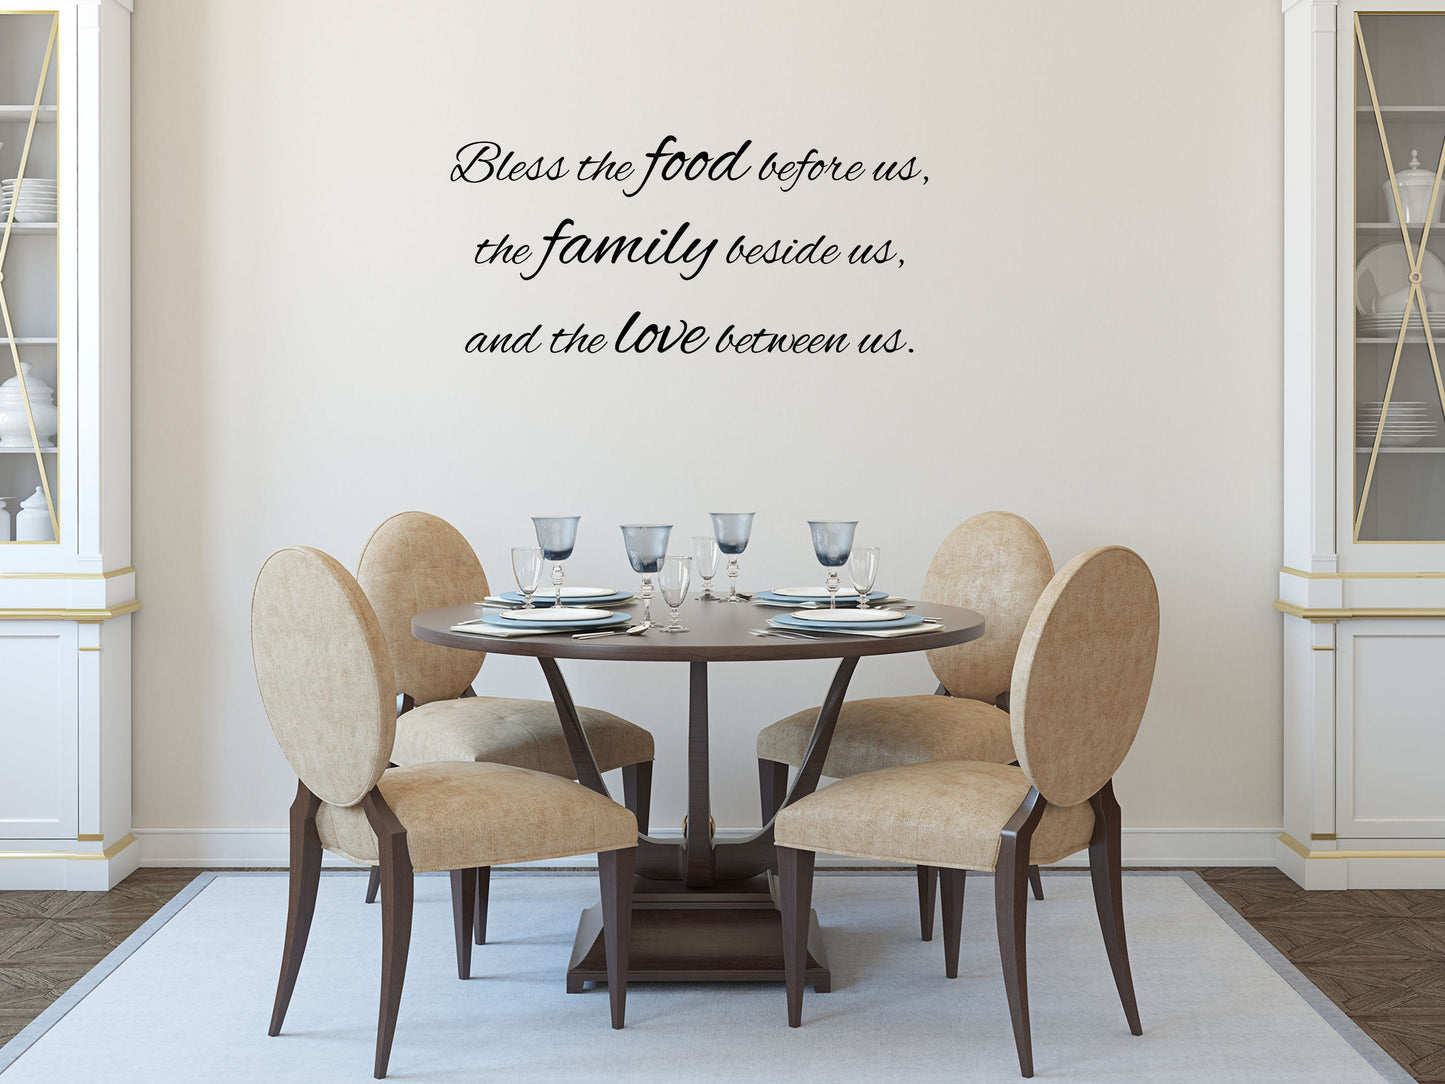 Bless The Food Before Us - Kitchen Wall Saying Vinyl Wall Lettering Decal - Blessing Dining Room Wall Lettering Quote - Wall Words Decor Vinyl Wall Decal Inspirational Wall Signs 